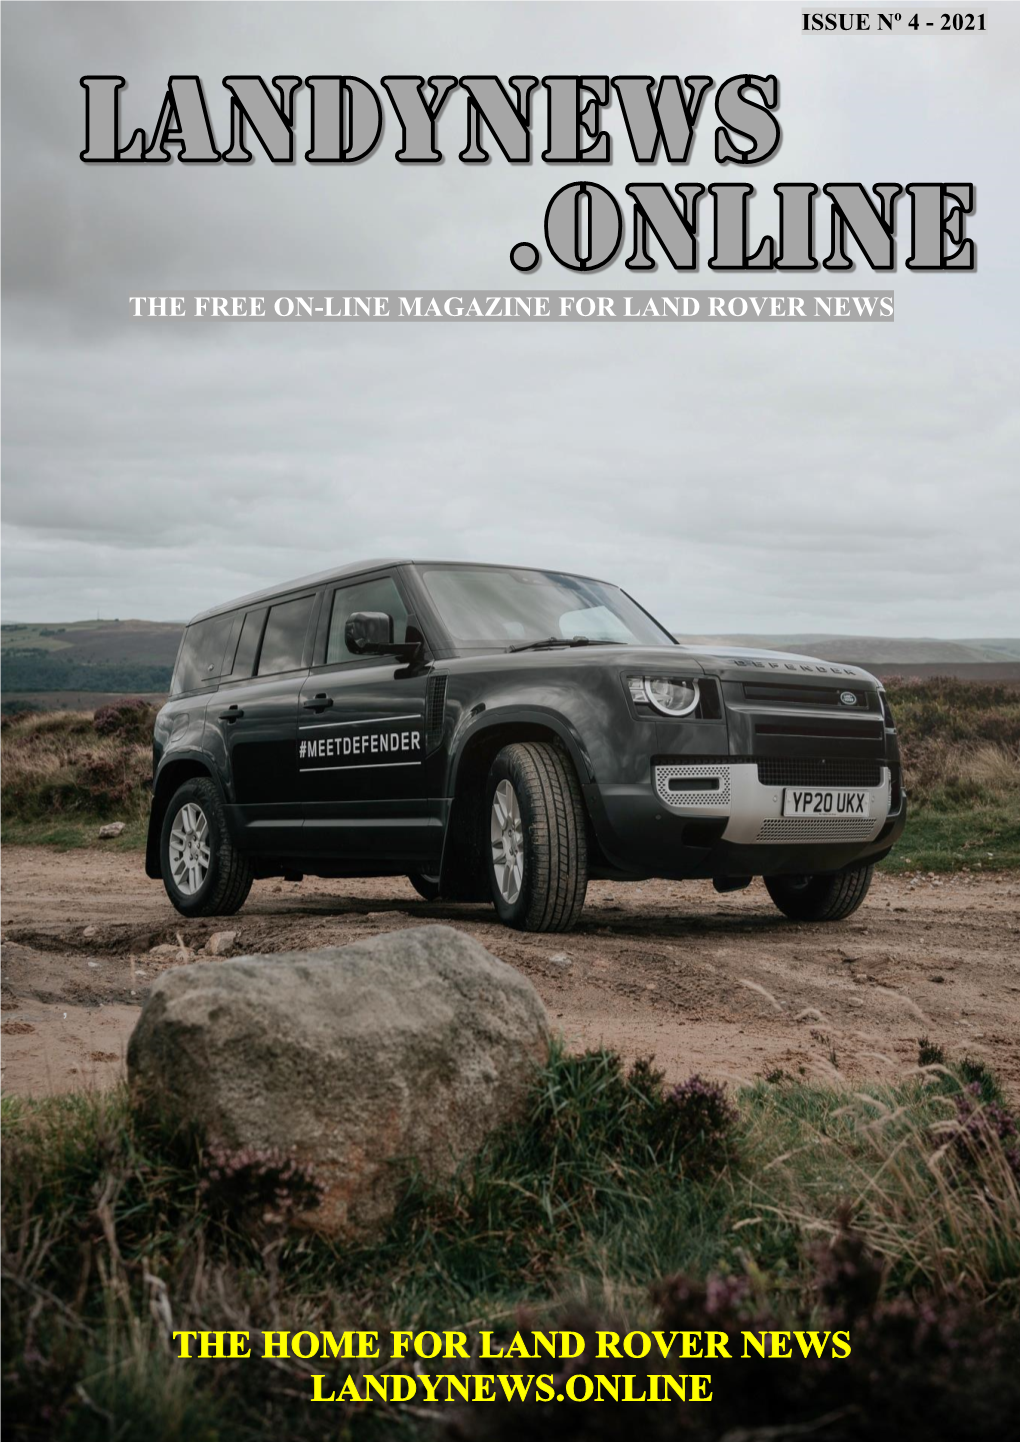 The Free On-Line Magazine for Land Rover News